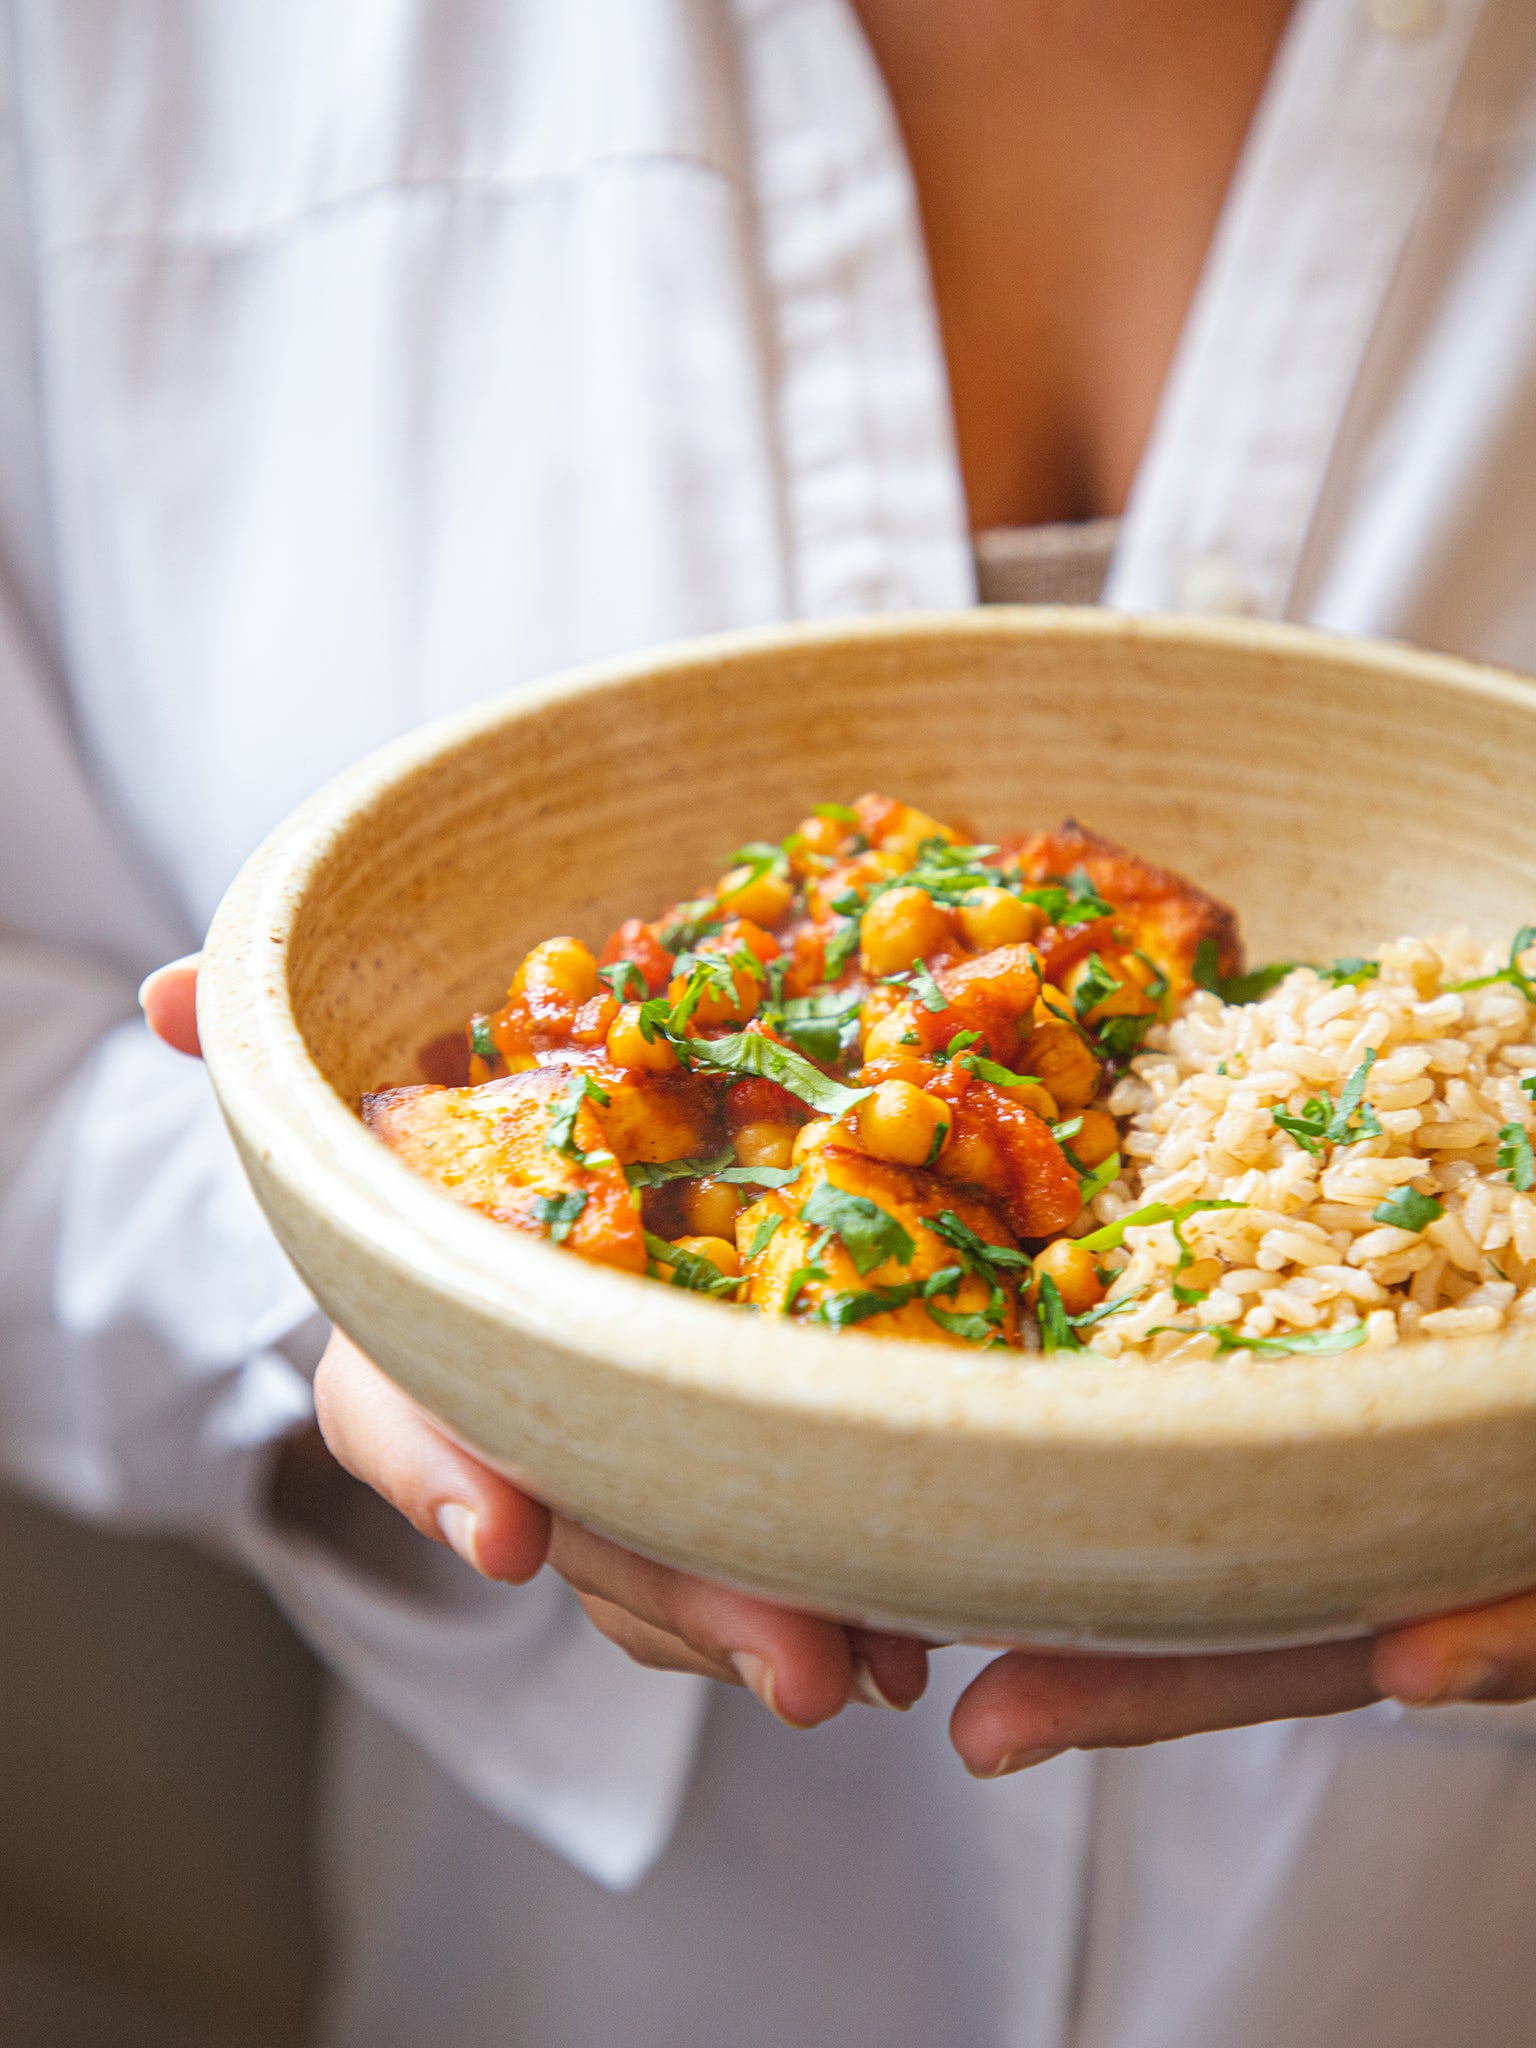 A curry that’s effortless, flavourful and stress-free